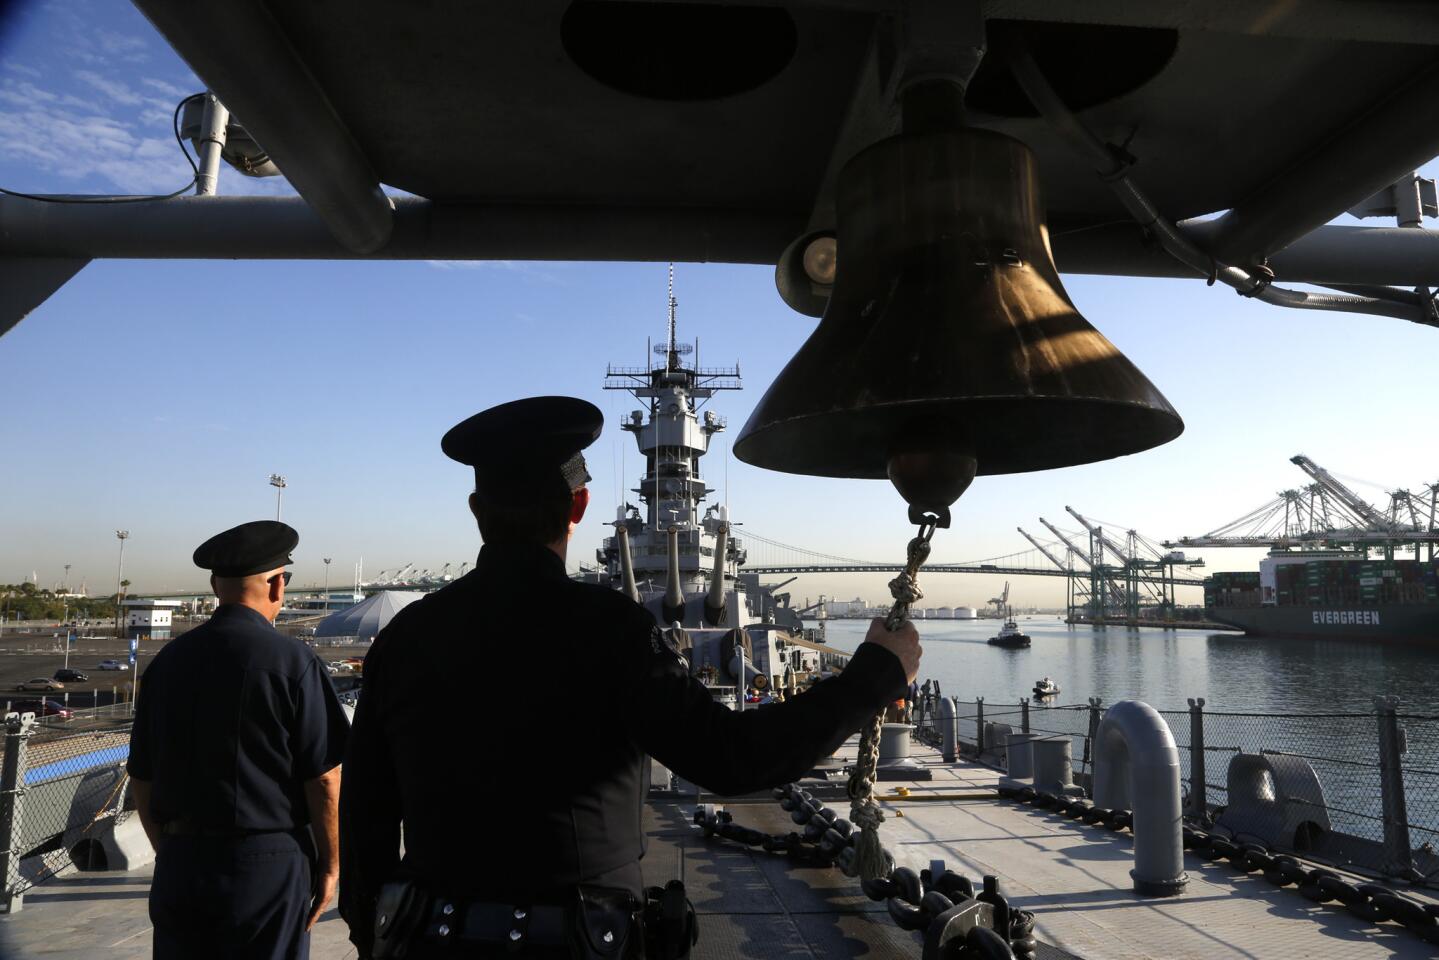 Los Angeles Port Police Officer Stacey J. Creech rings the ship's bell aboard the USS Iowa in San Pedro after the names of 40 first responders who died during 911 were read during a ceremony marking the 14th anniversary of the attacks September 11th.